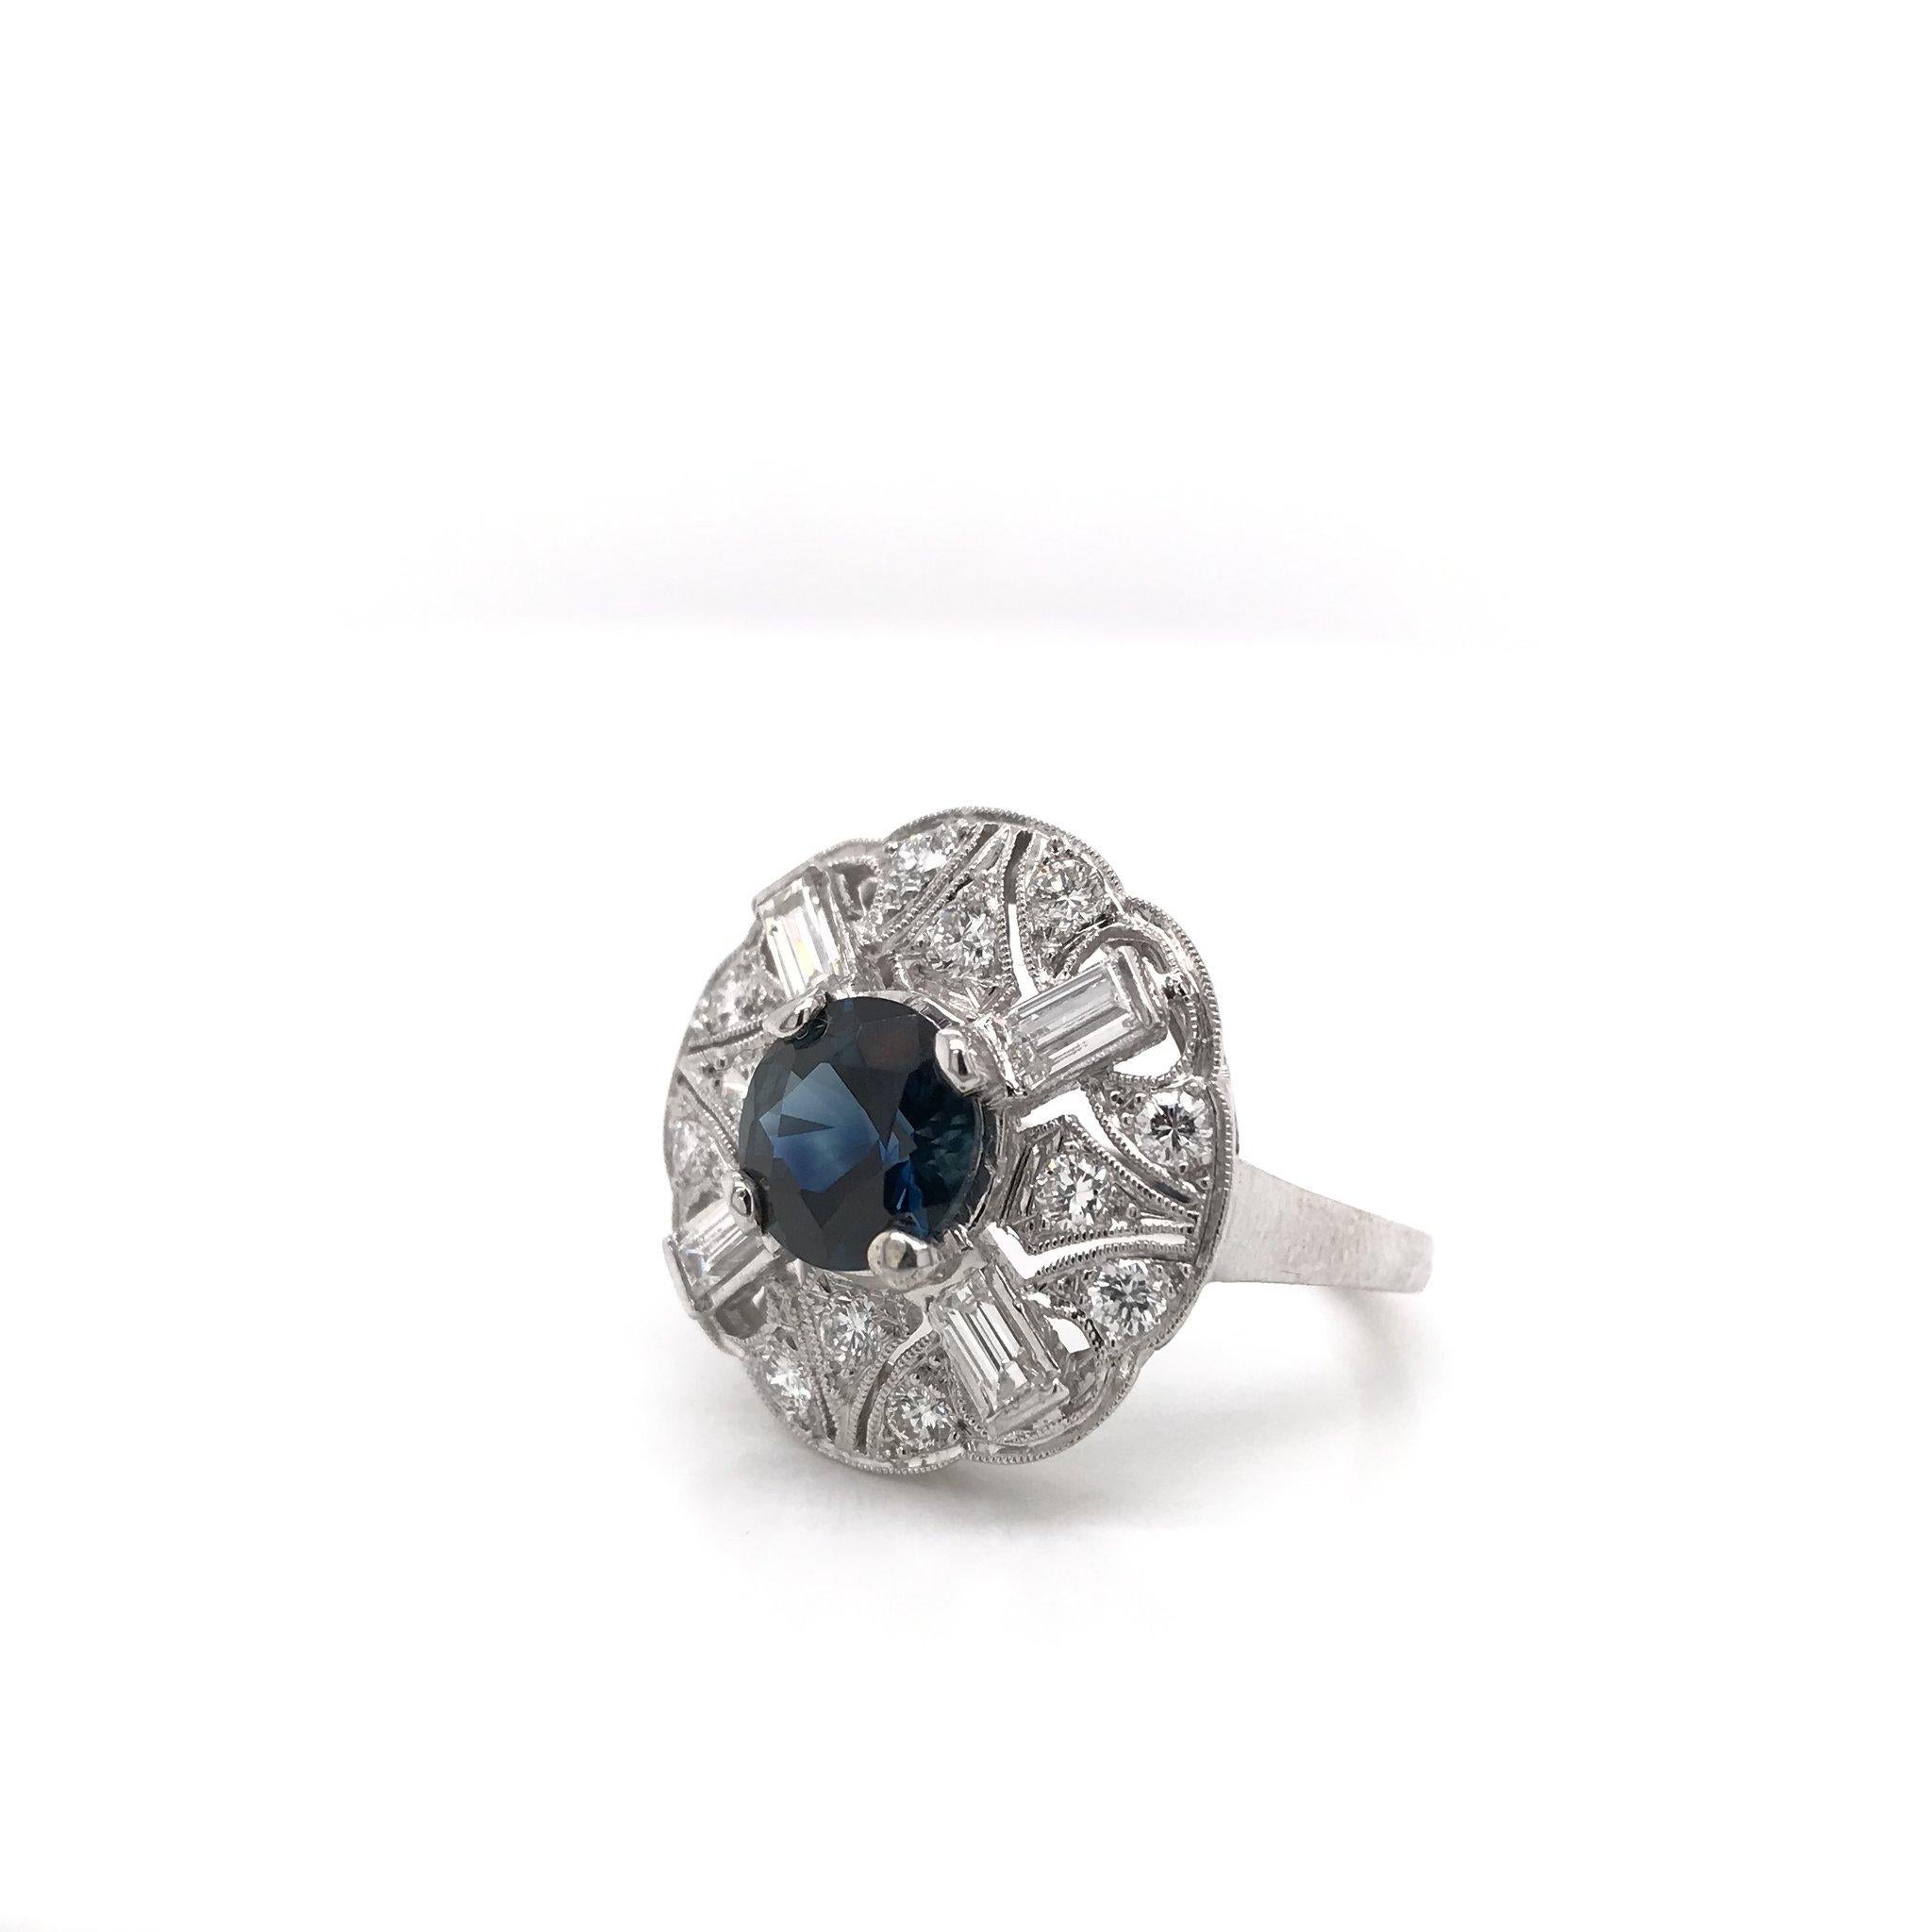 This gorgeous platinum cocktail ring was crafted sometime during the Retro design era ( 1940-1960 ). The center stone is a round 1.82 carat blue sapphire. The setting features fine milgrain accents, intricate geometric motif filigree, 12 round cut